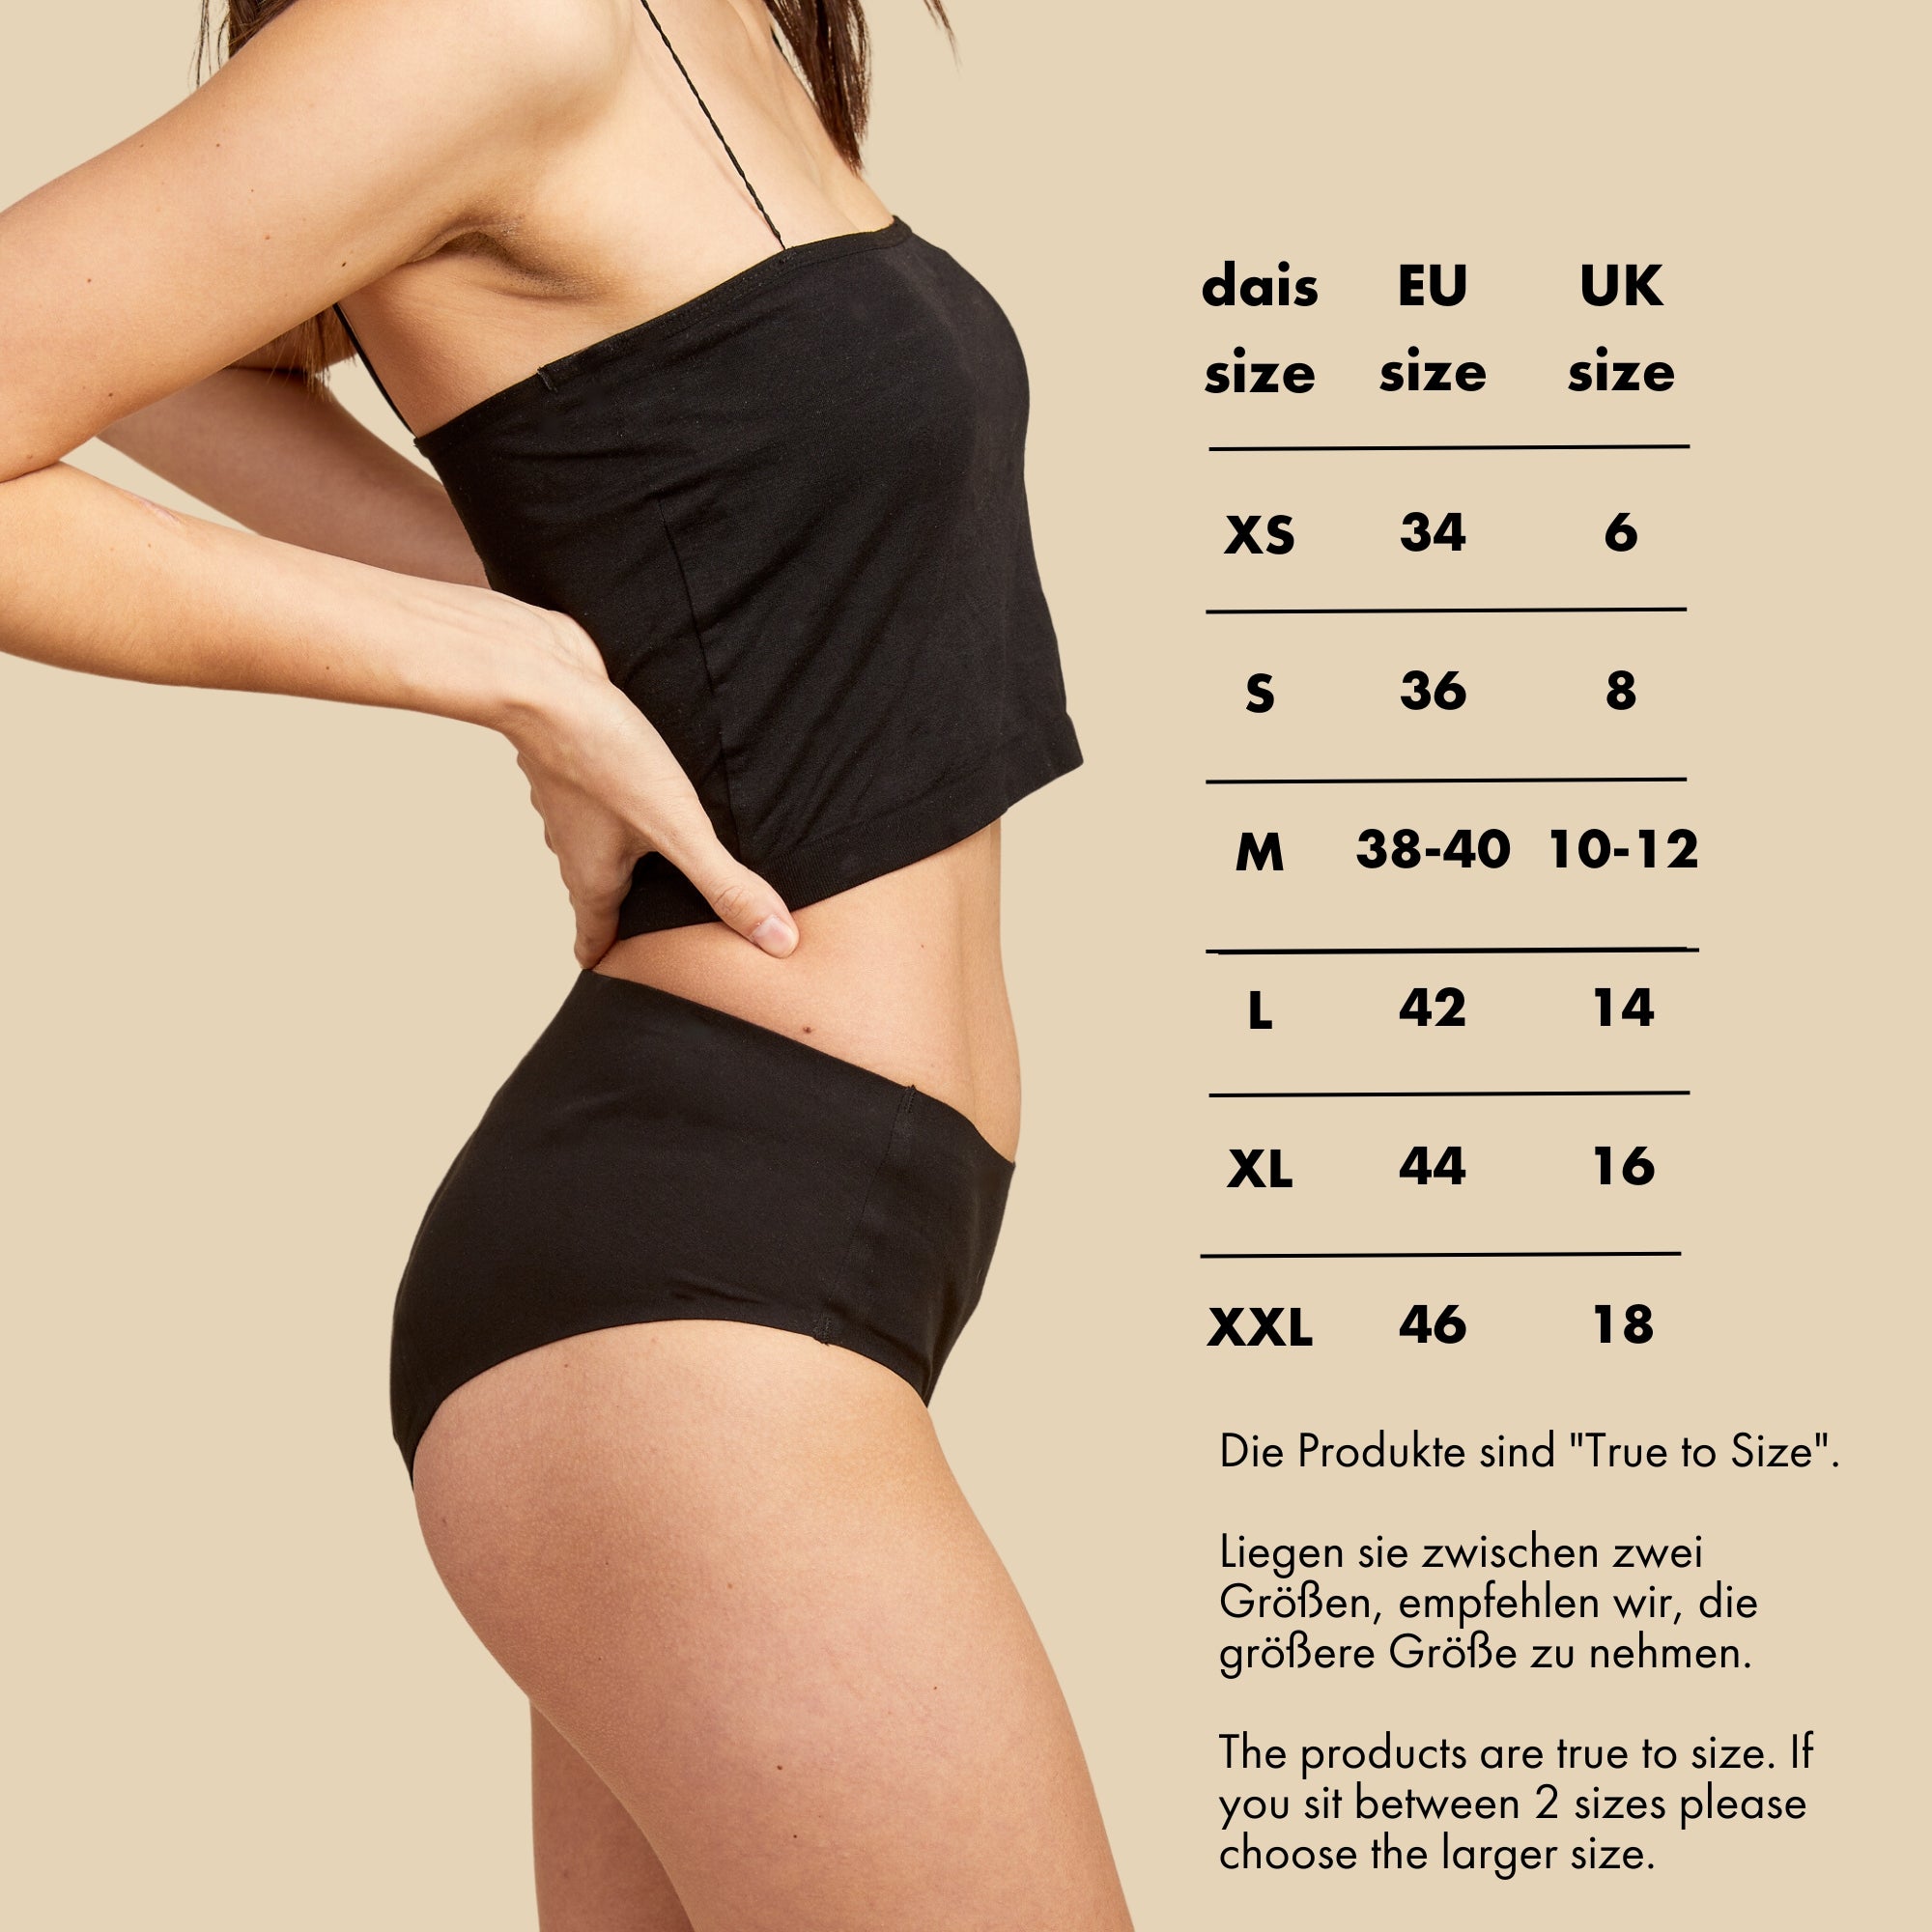 Size chart for dais period underwear in hipster cut with options XS, S, M, L, XL,XXL with EU and UK size conversions.